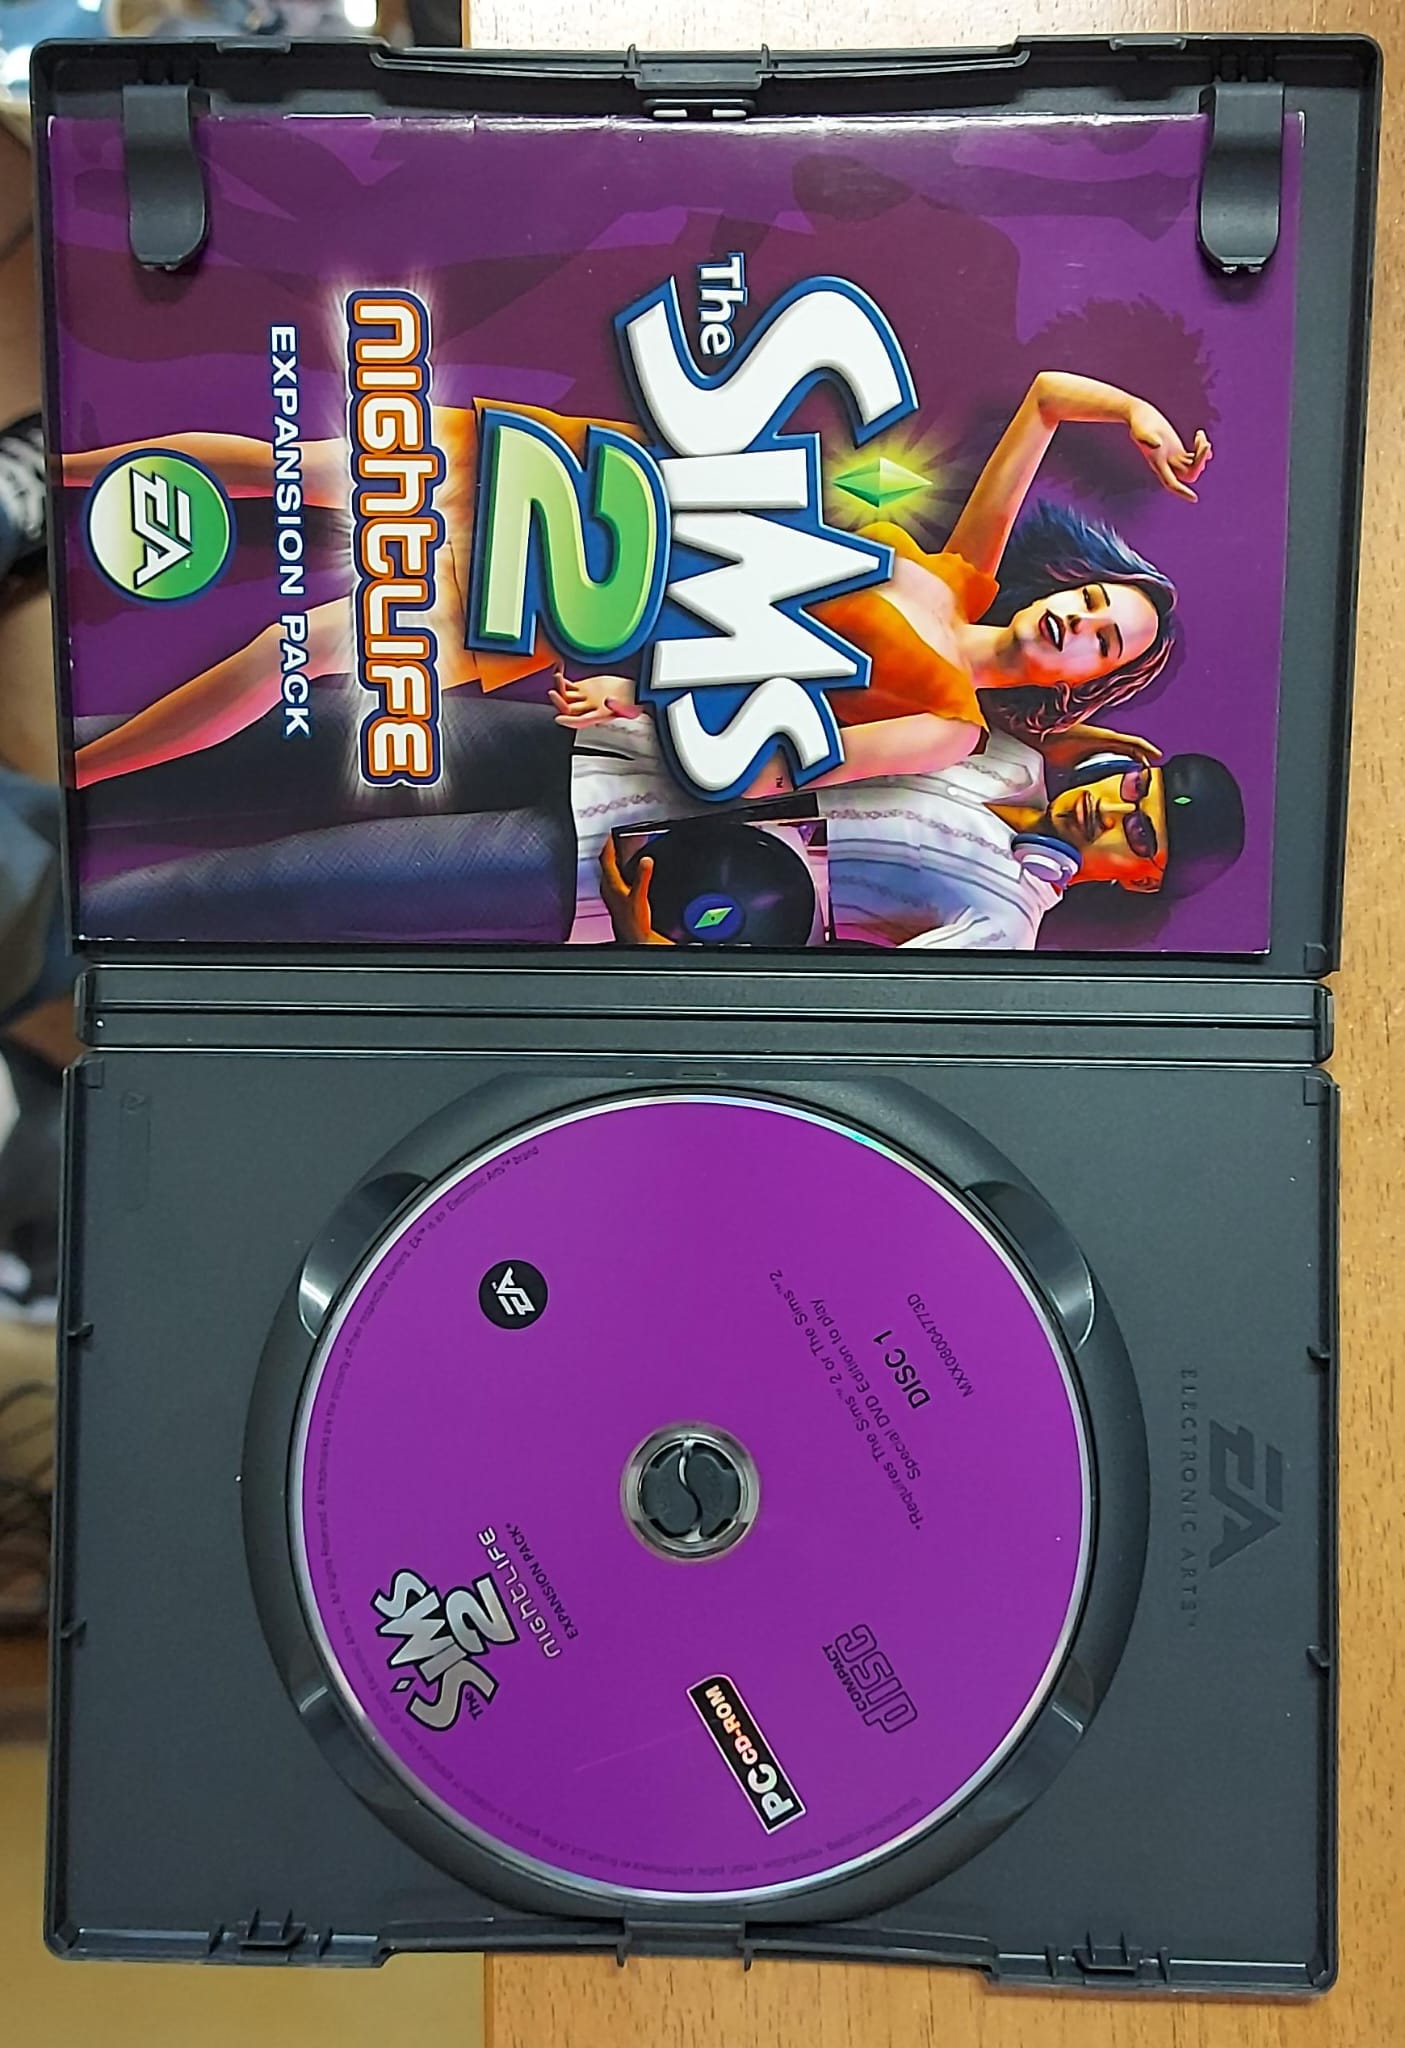 THE SIMS 2 NIGHTLIFE EXPANSION PACK